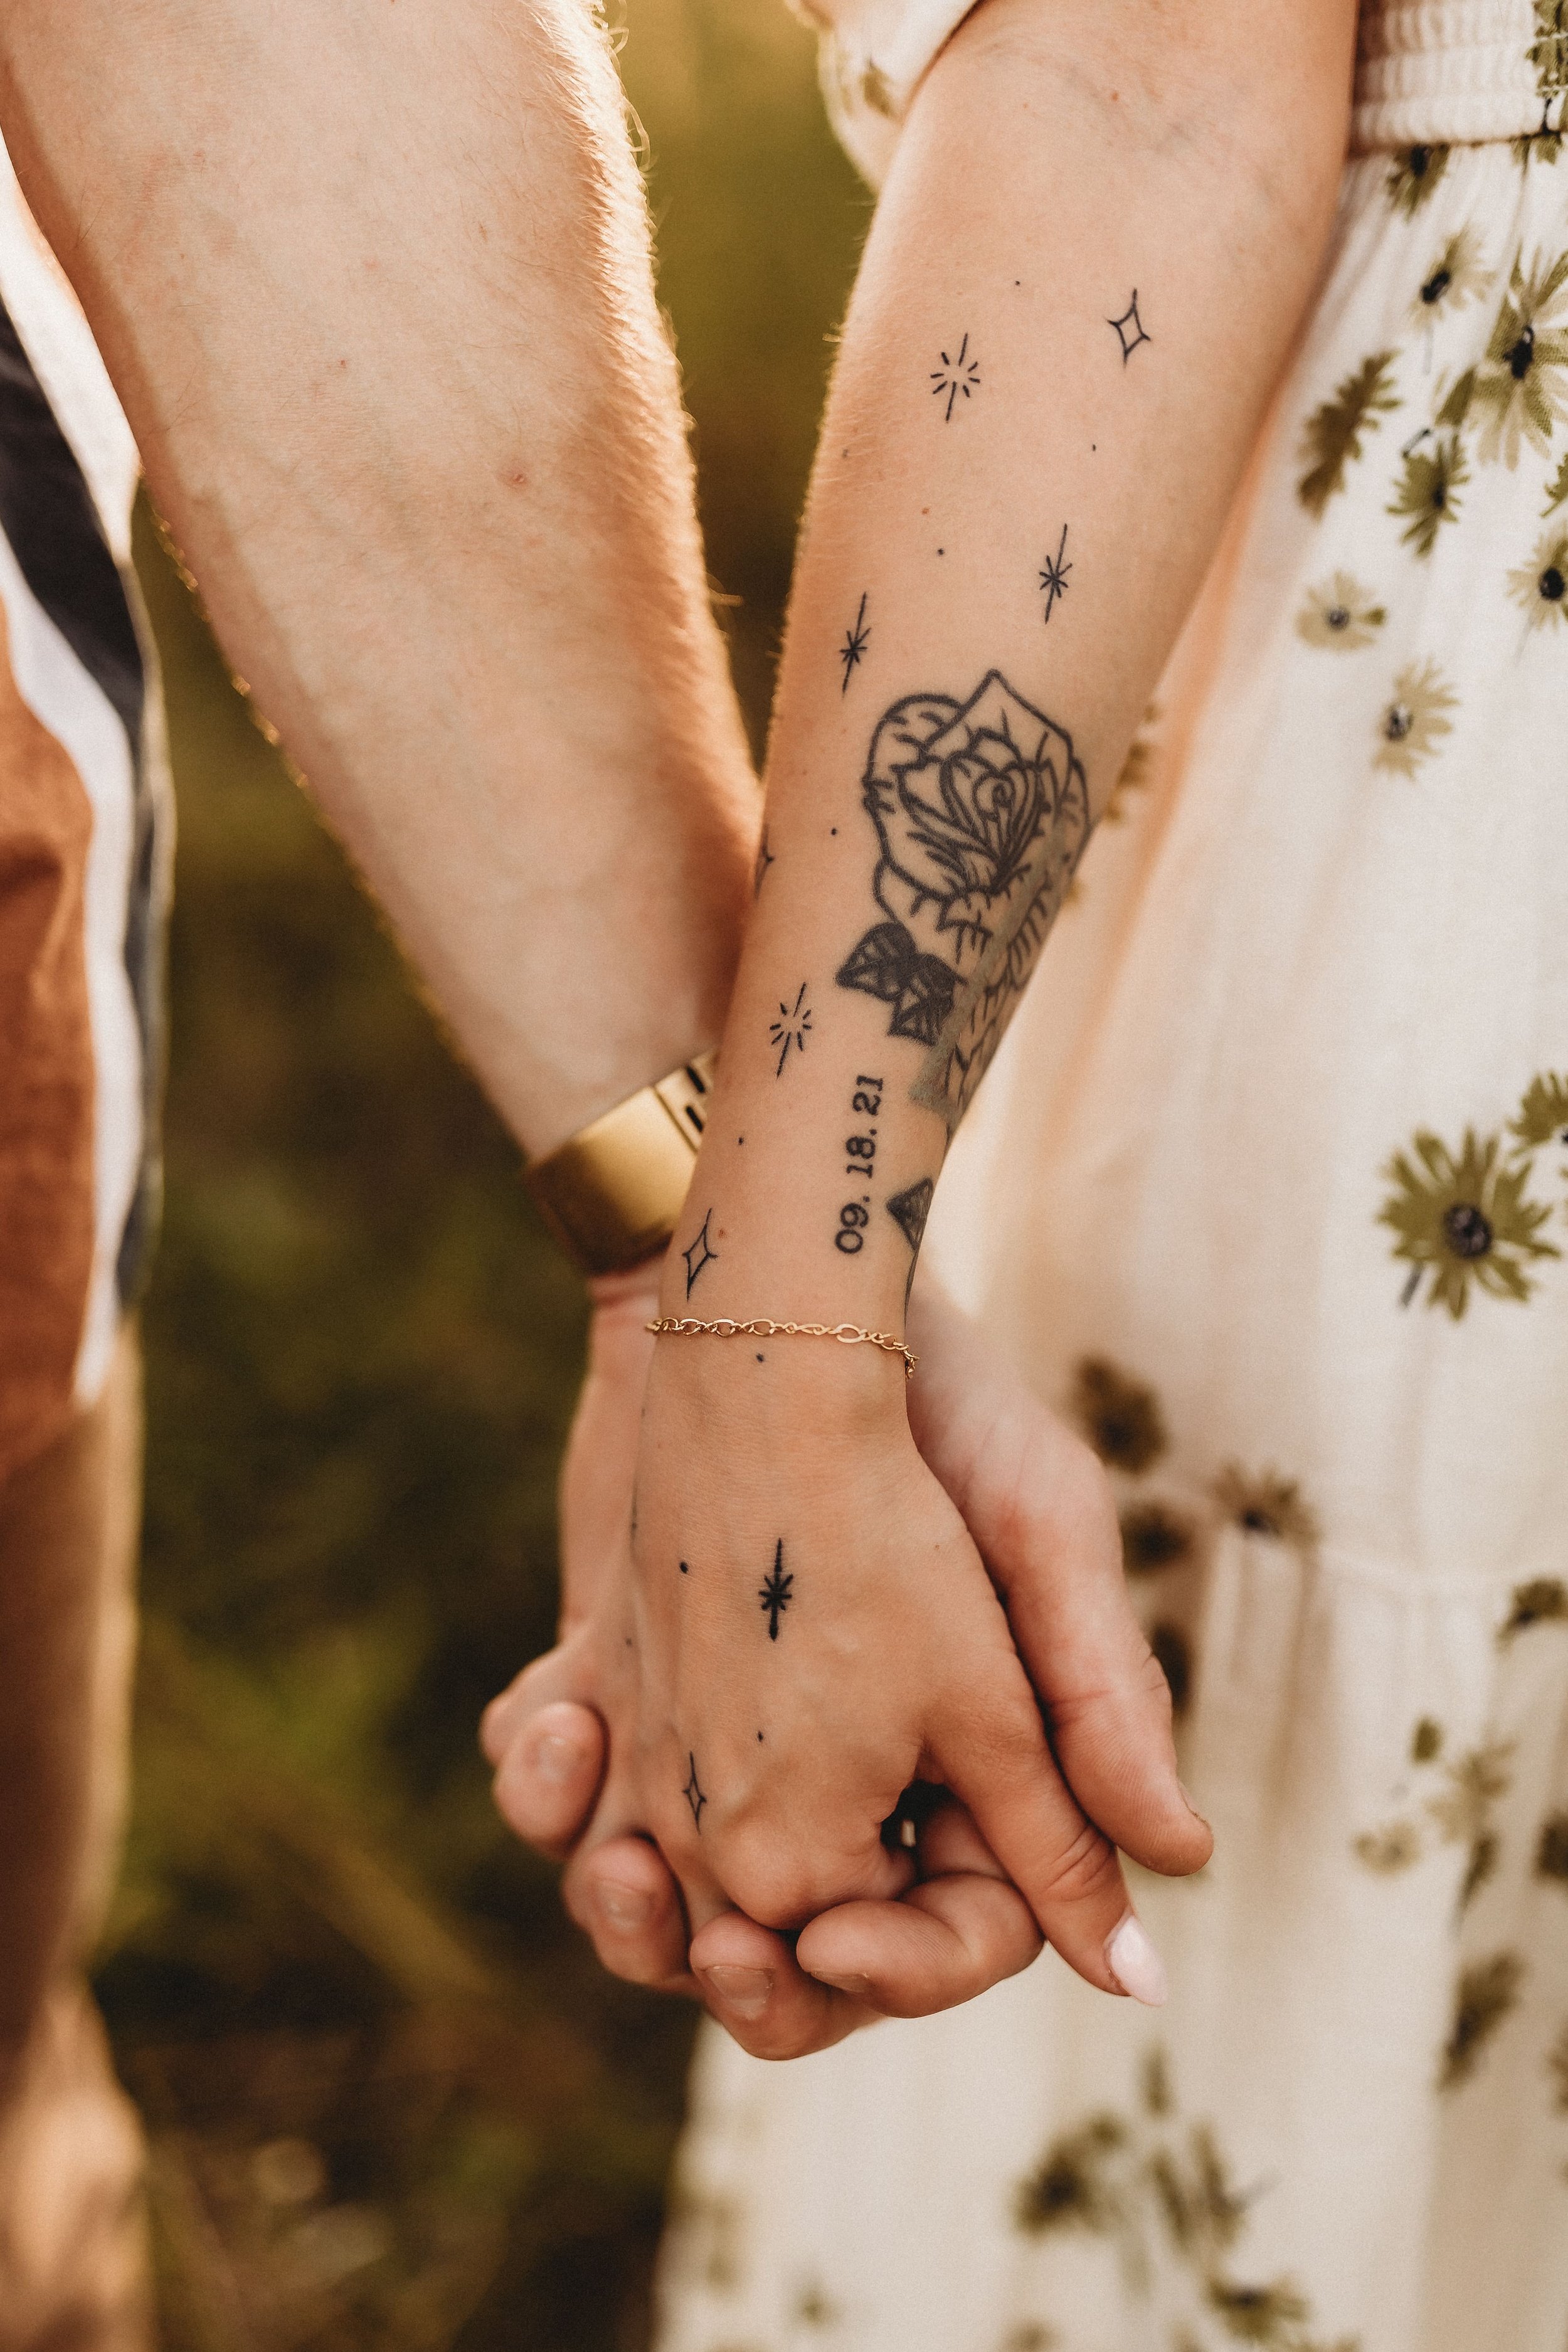 Top more than 157 marriage date tattoos